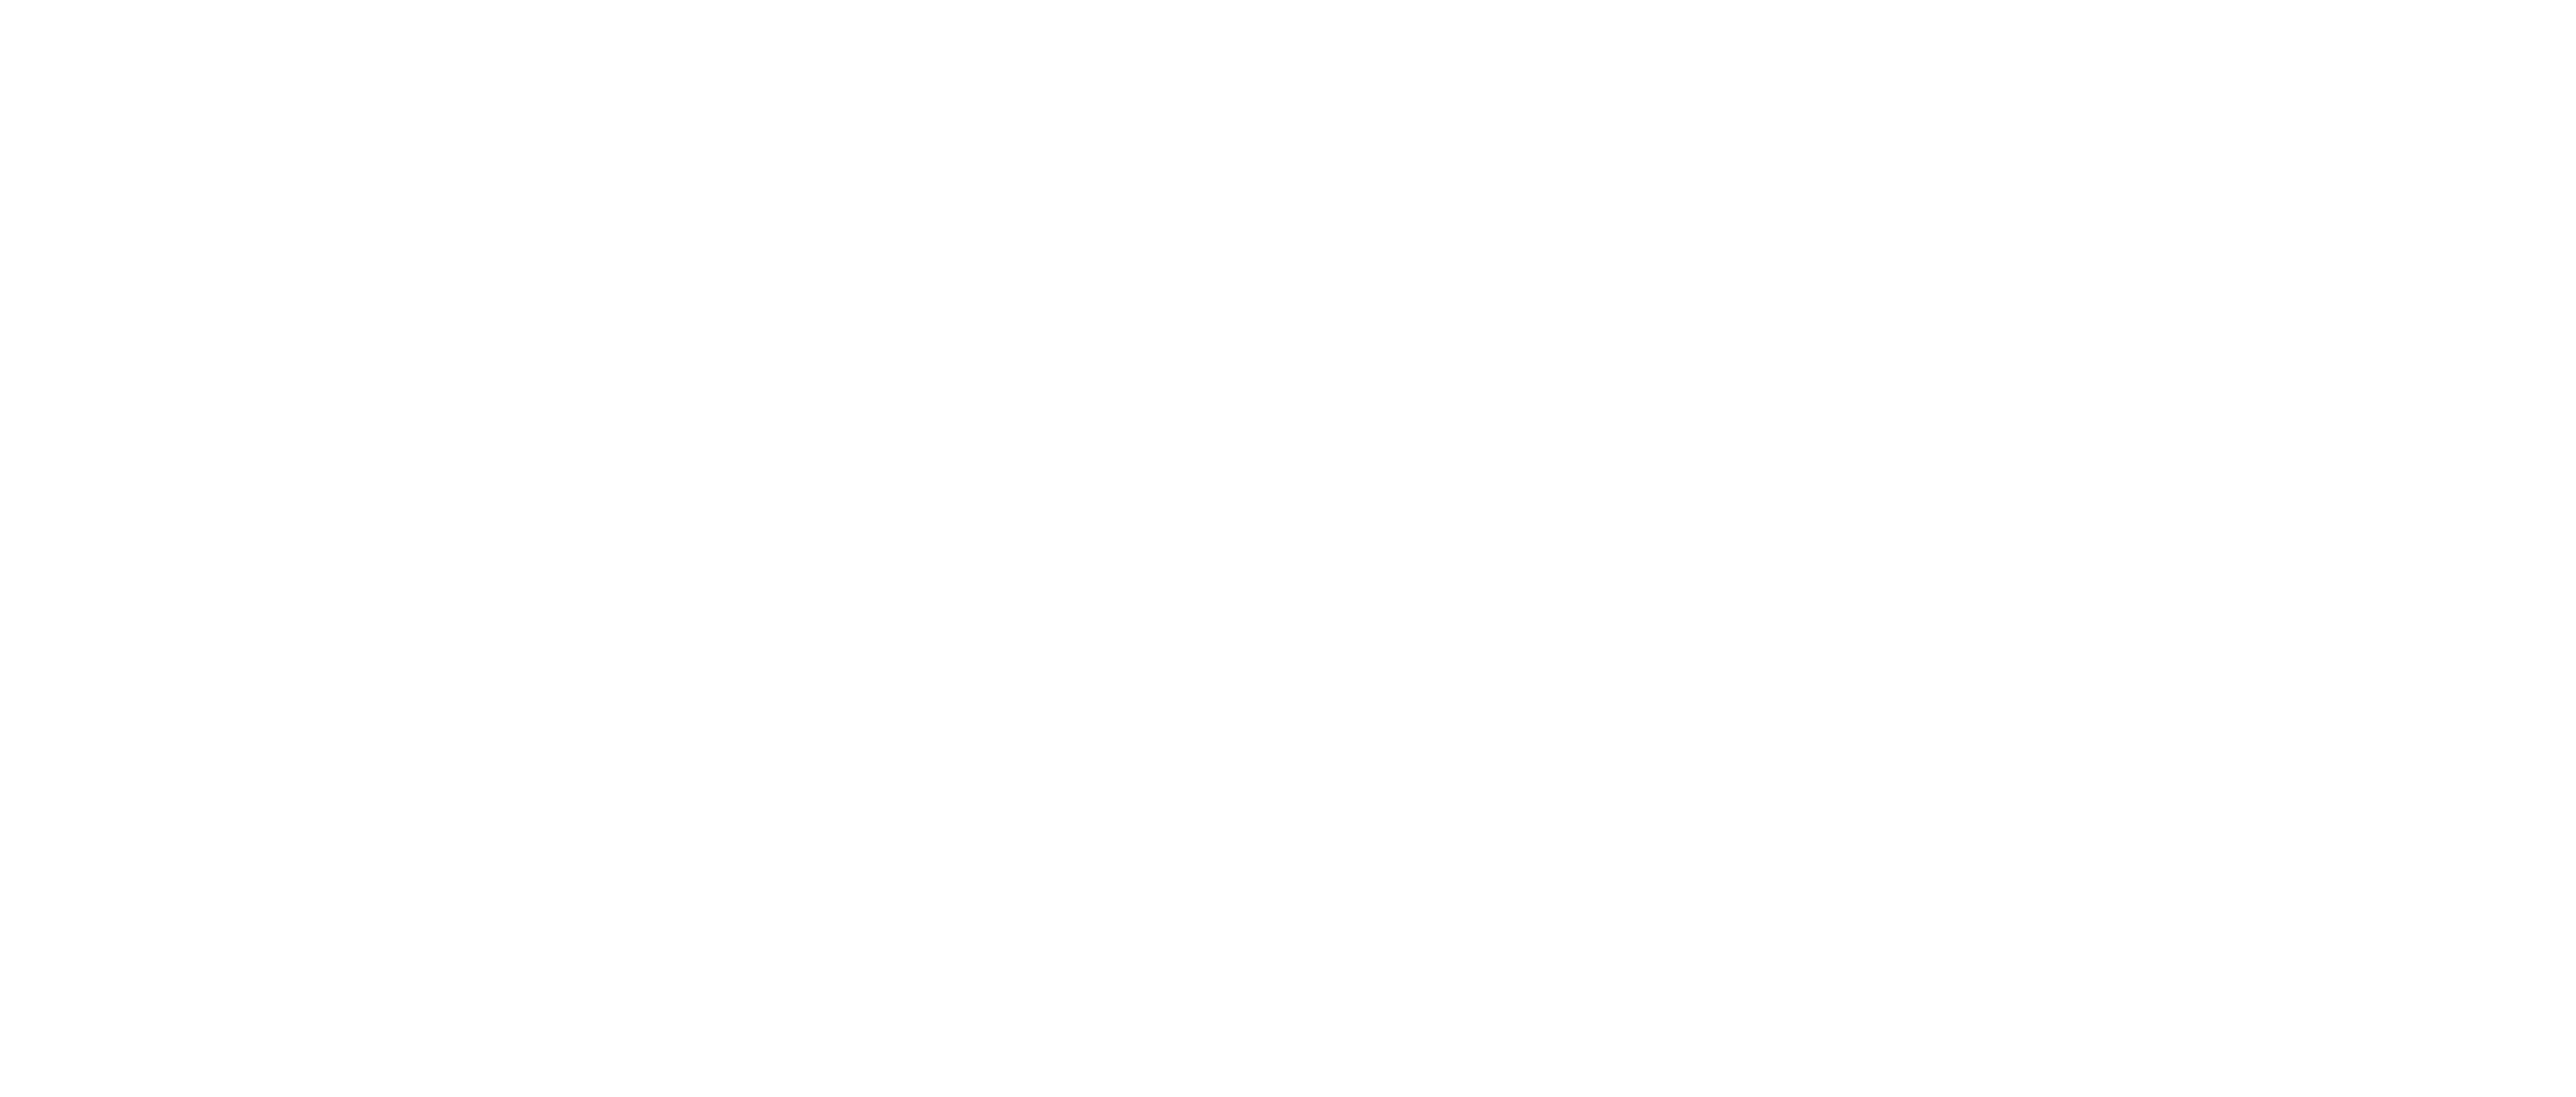 One Percent for the Planet Member